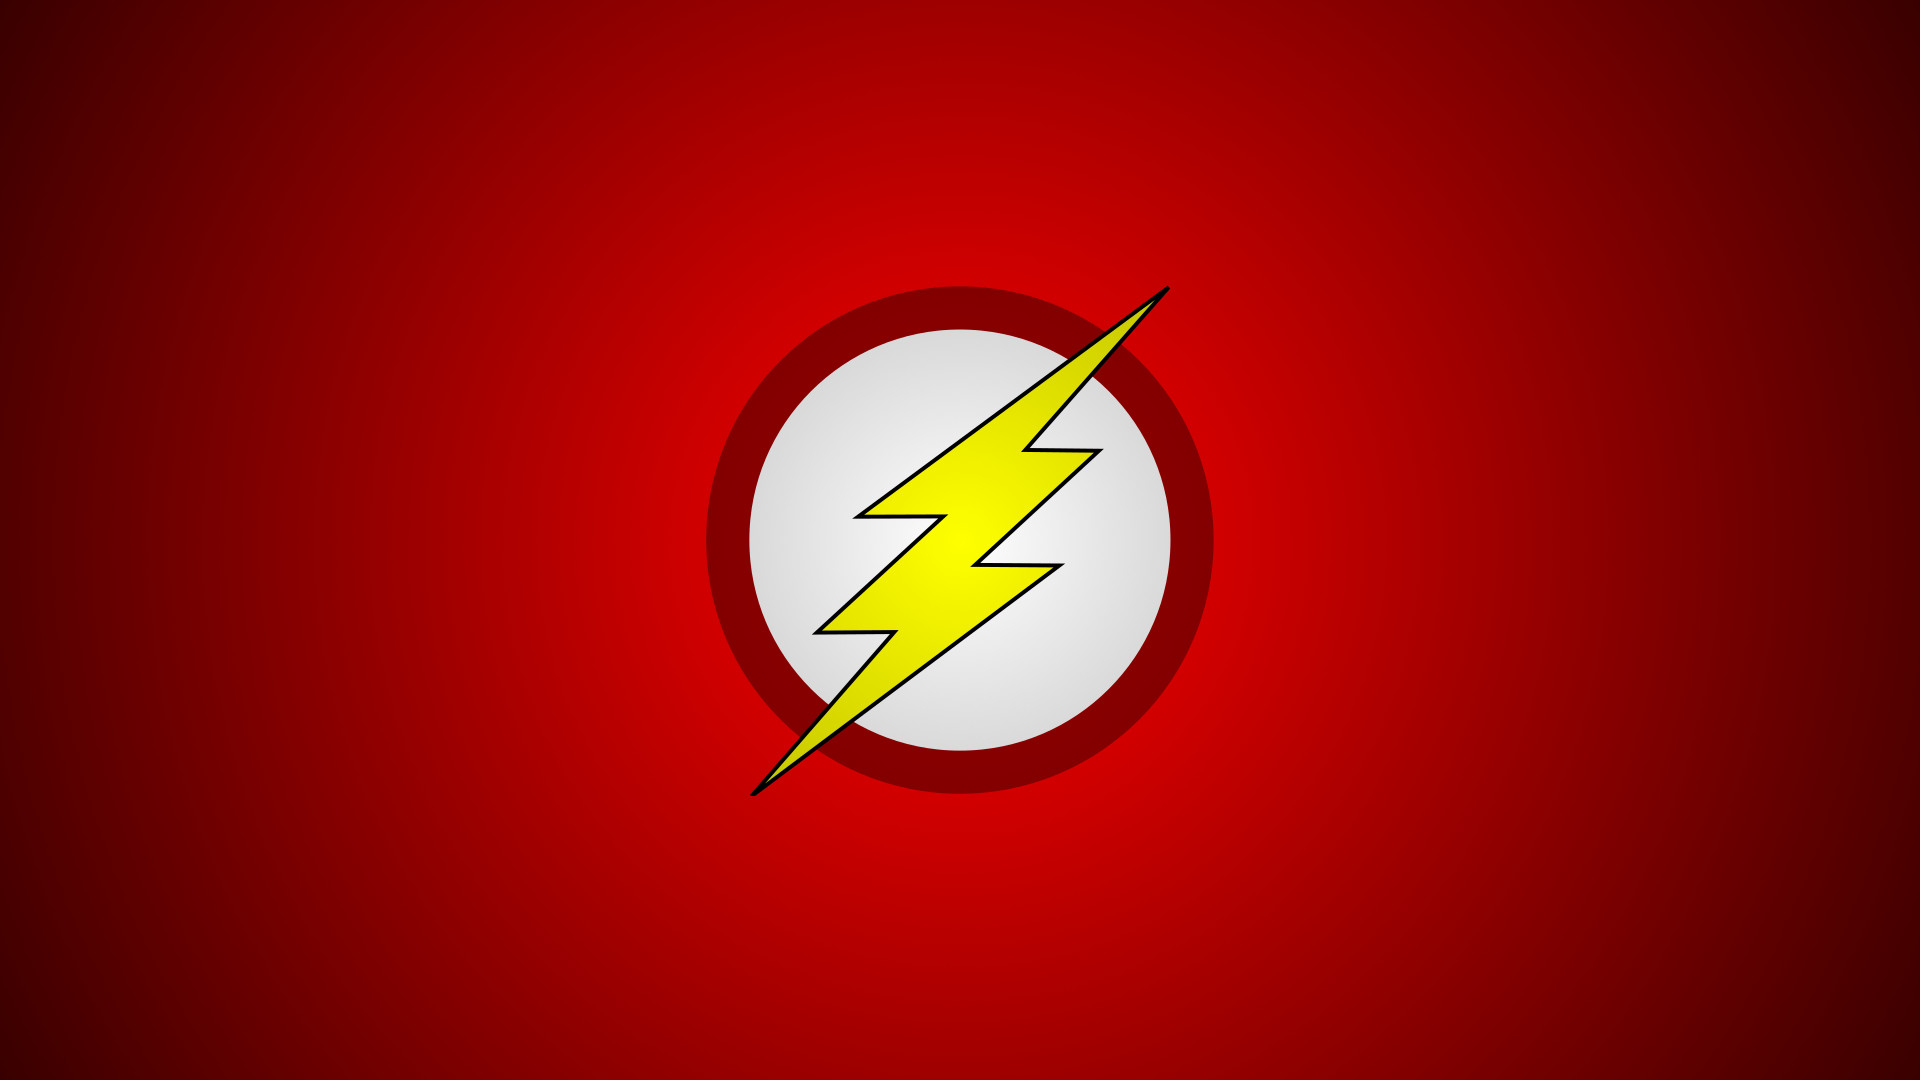 reverse flash wallpaper iphone, red, logo, yellow, font, graphic design